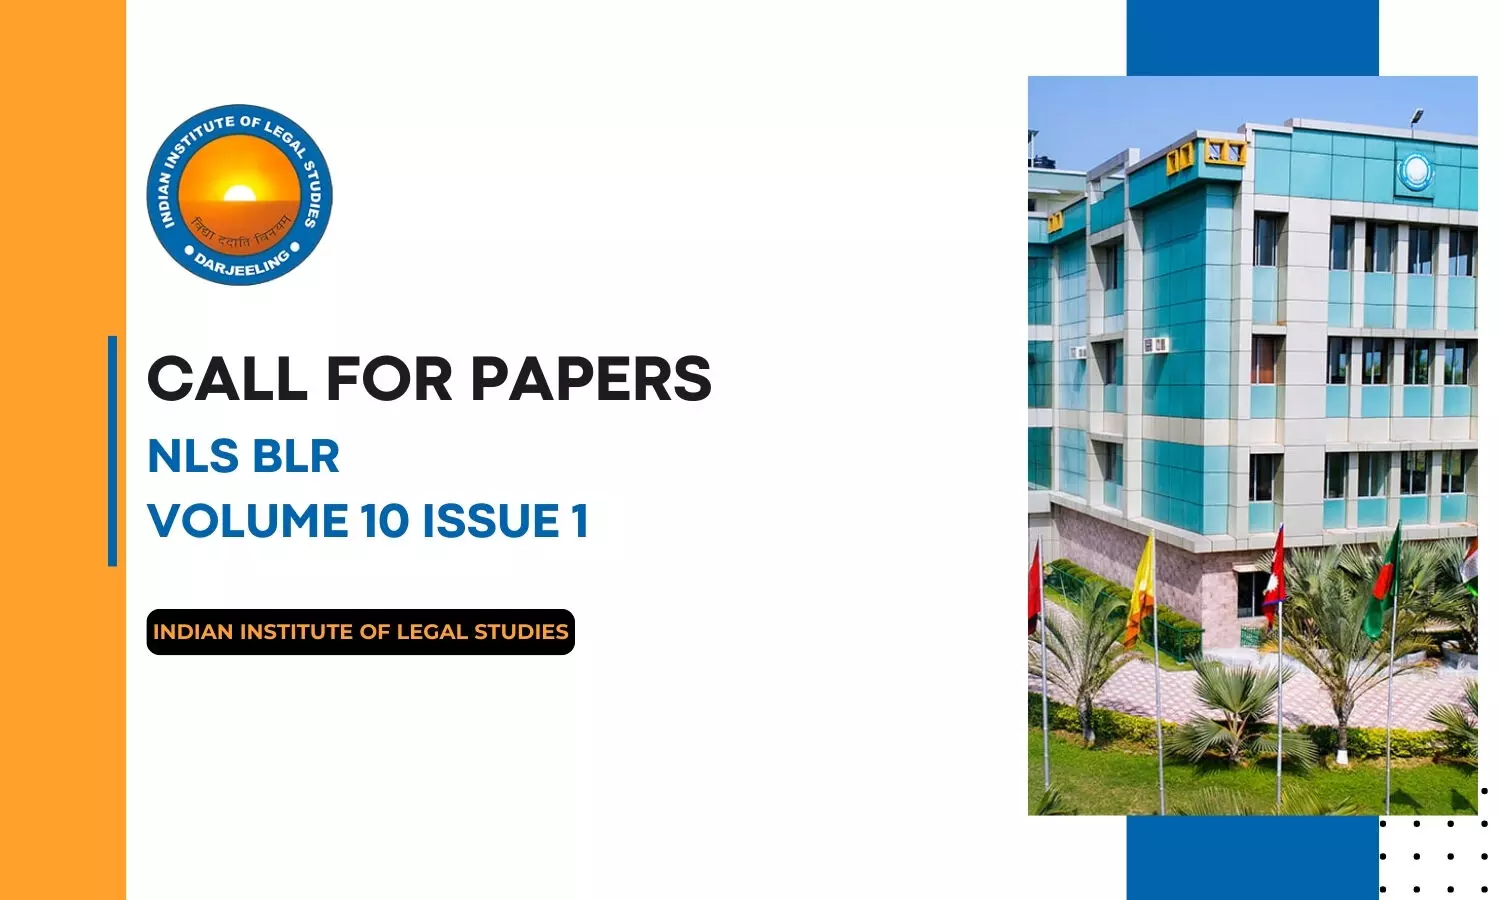 Call for Papers: IILS Law Review Volume 10 Issue 1